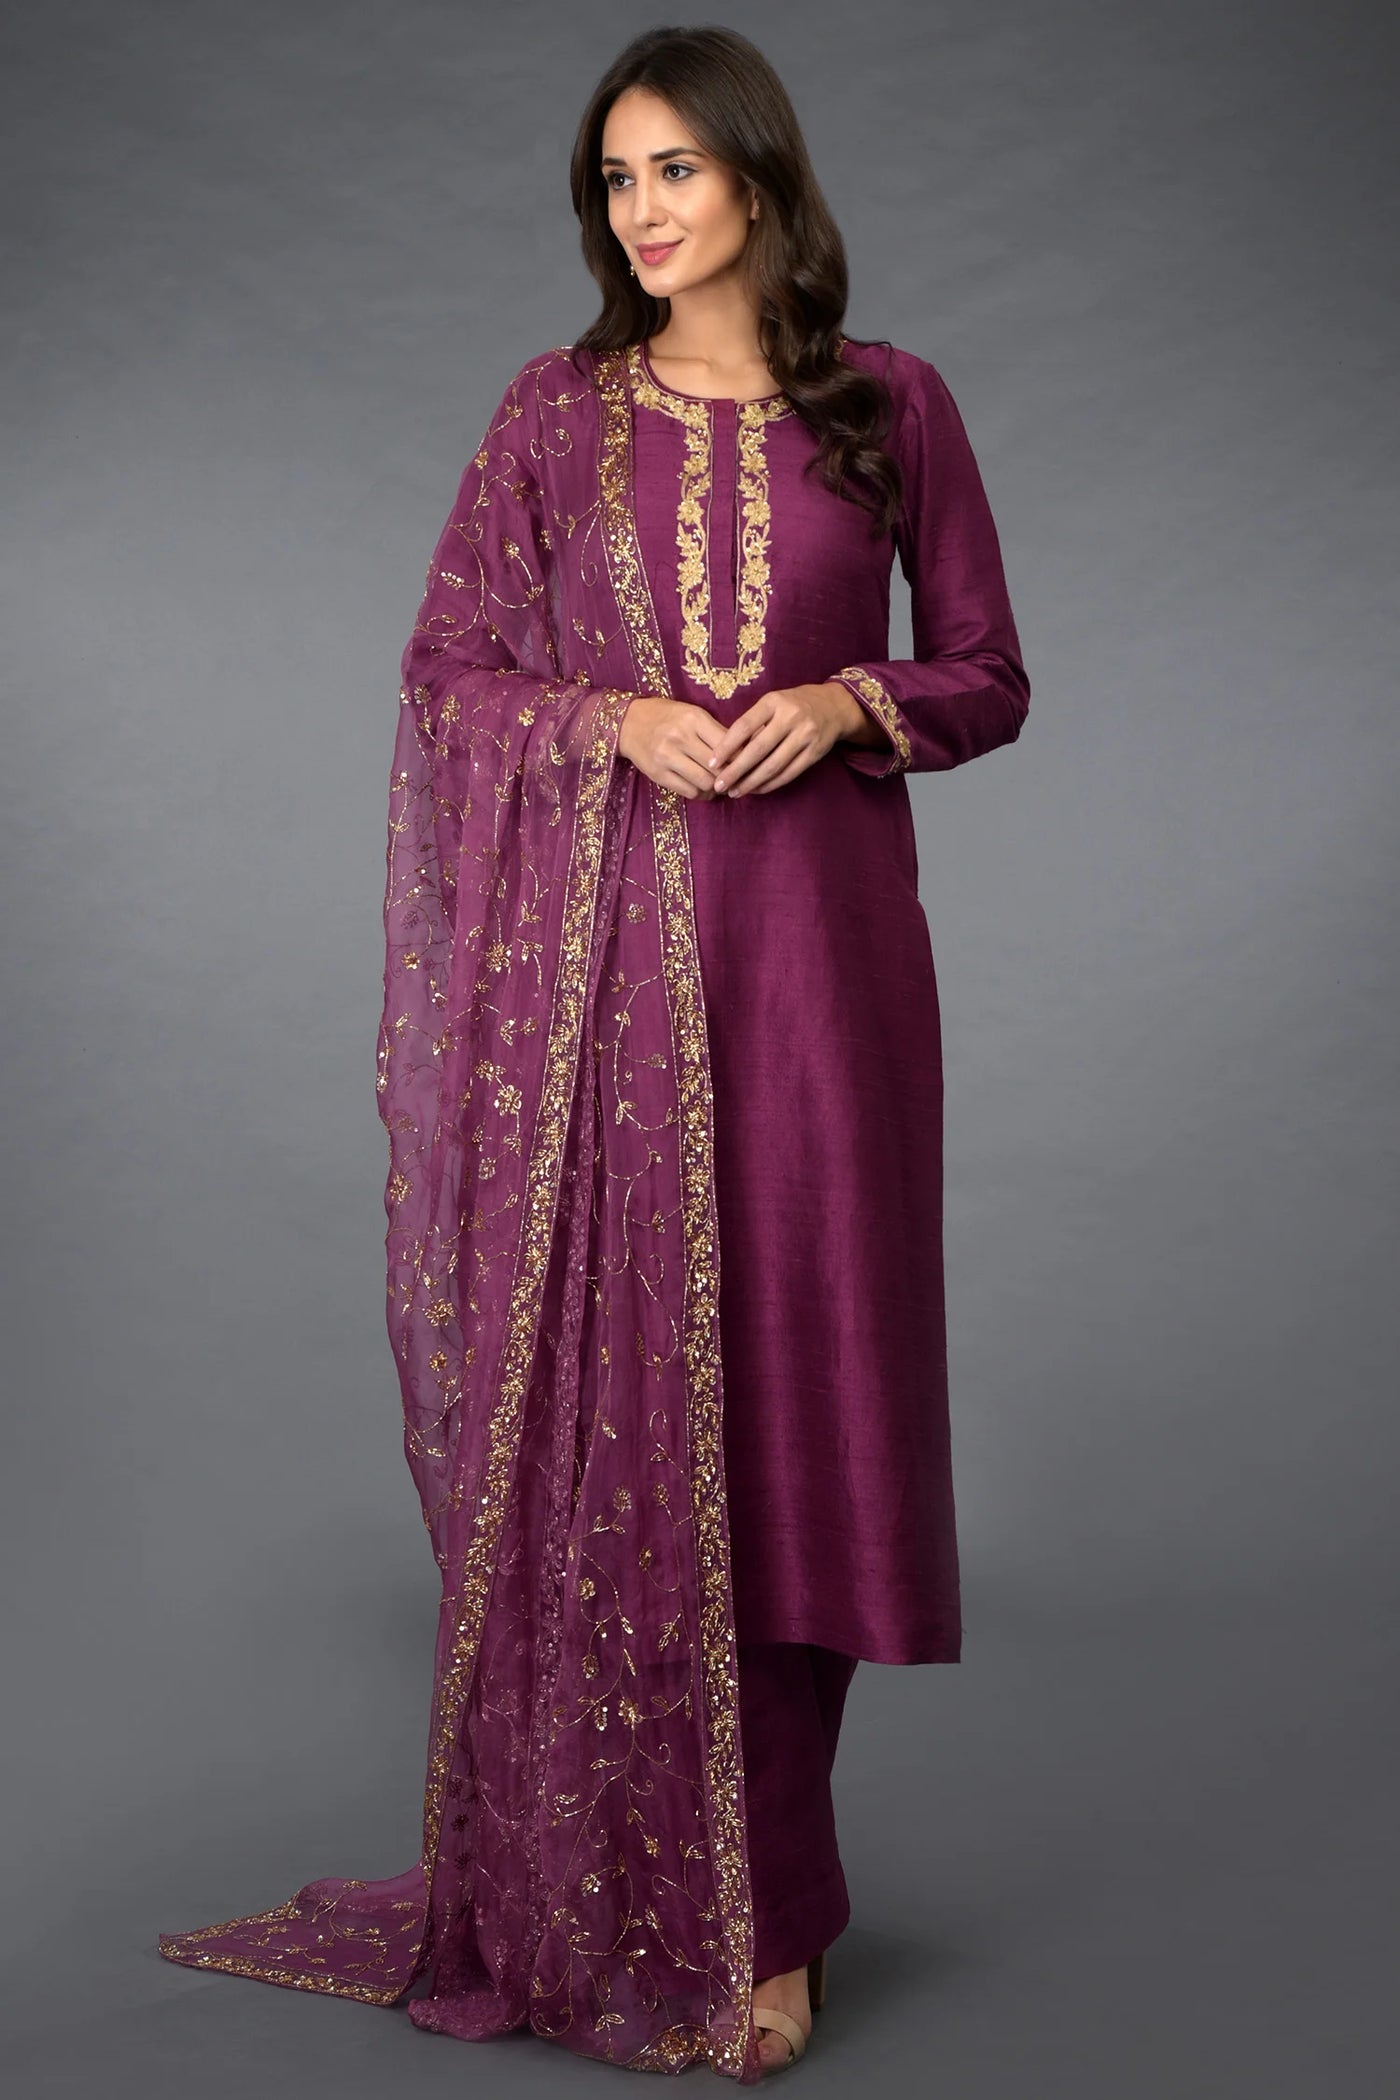 Purple Raw Silk Palazzo Set Indian Clothing in Denver, CO, Aurora, CO, Boulder, CO, Fort Collins, CO, Colorado Springs, CO, Parker, CO, Highlands Ranch, CO, Cherry Creek, CO, Centennial, CO, and Longmont, CO. NATIONWIDE SHIPPING USA- India Fashion X